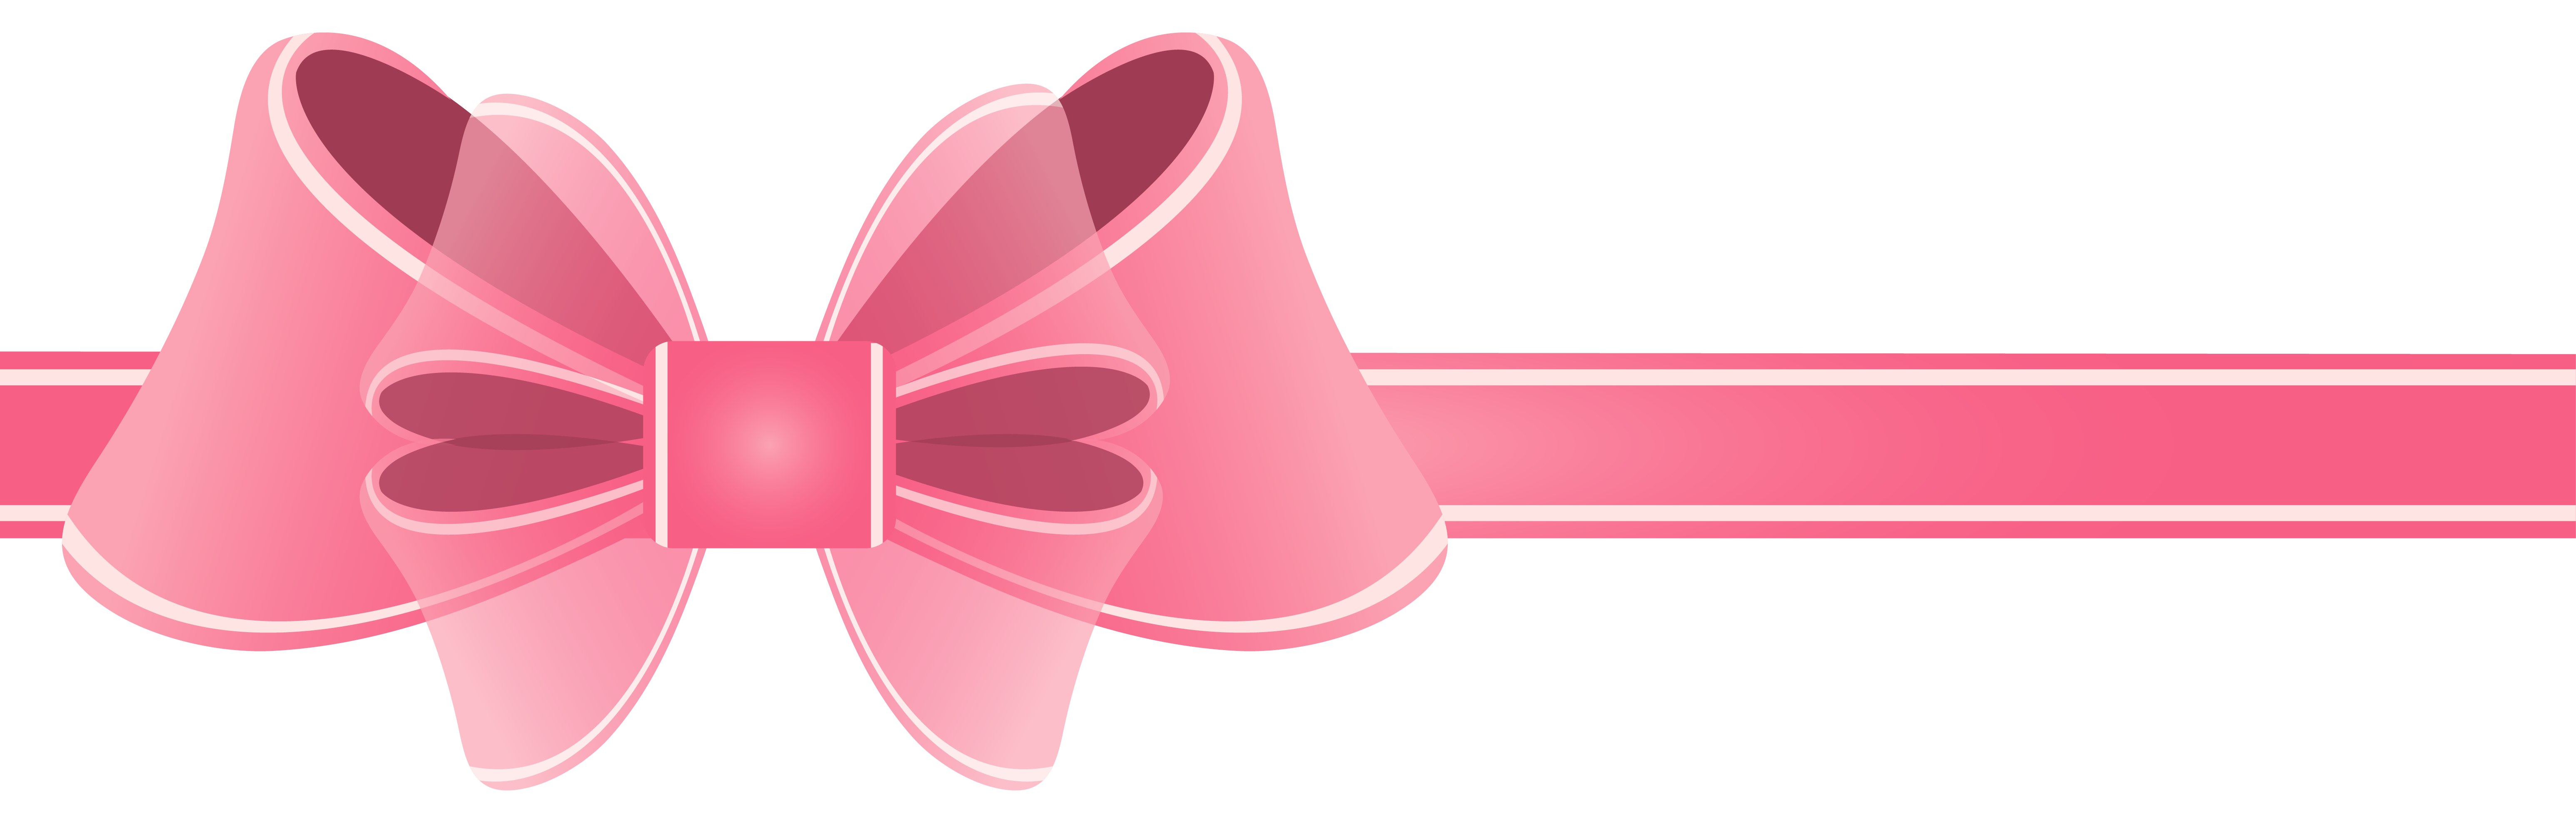 Pink png picture gallery. Logo clipart ribbon